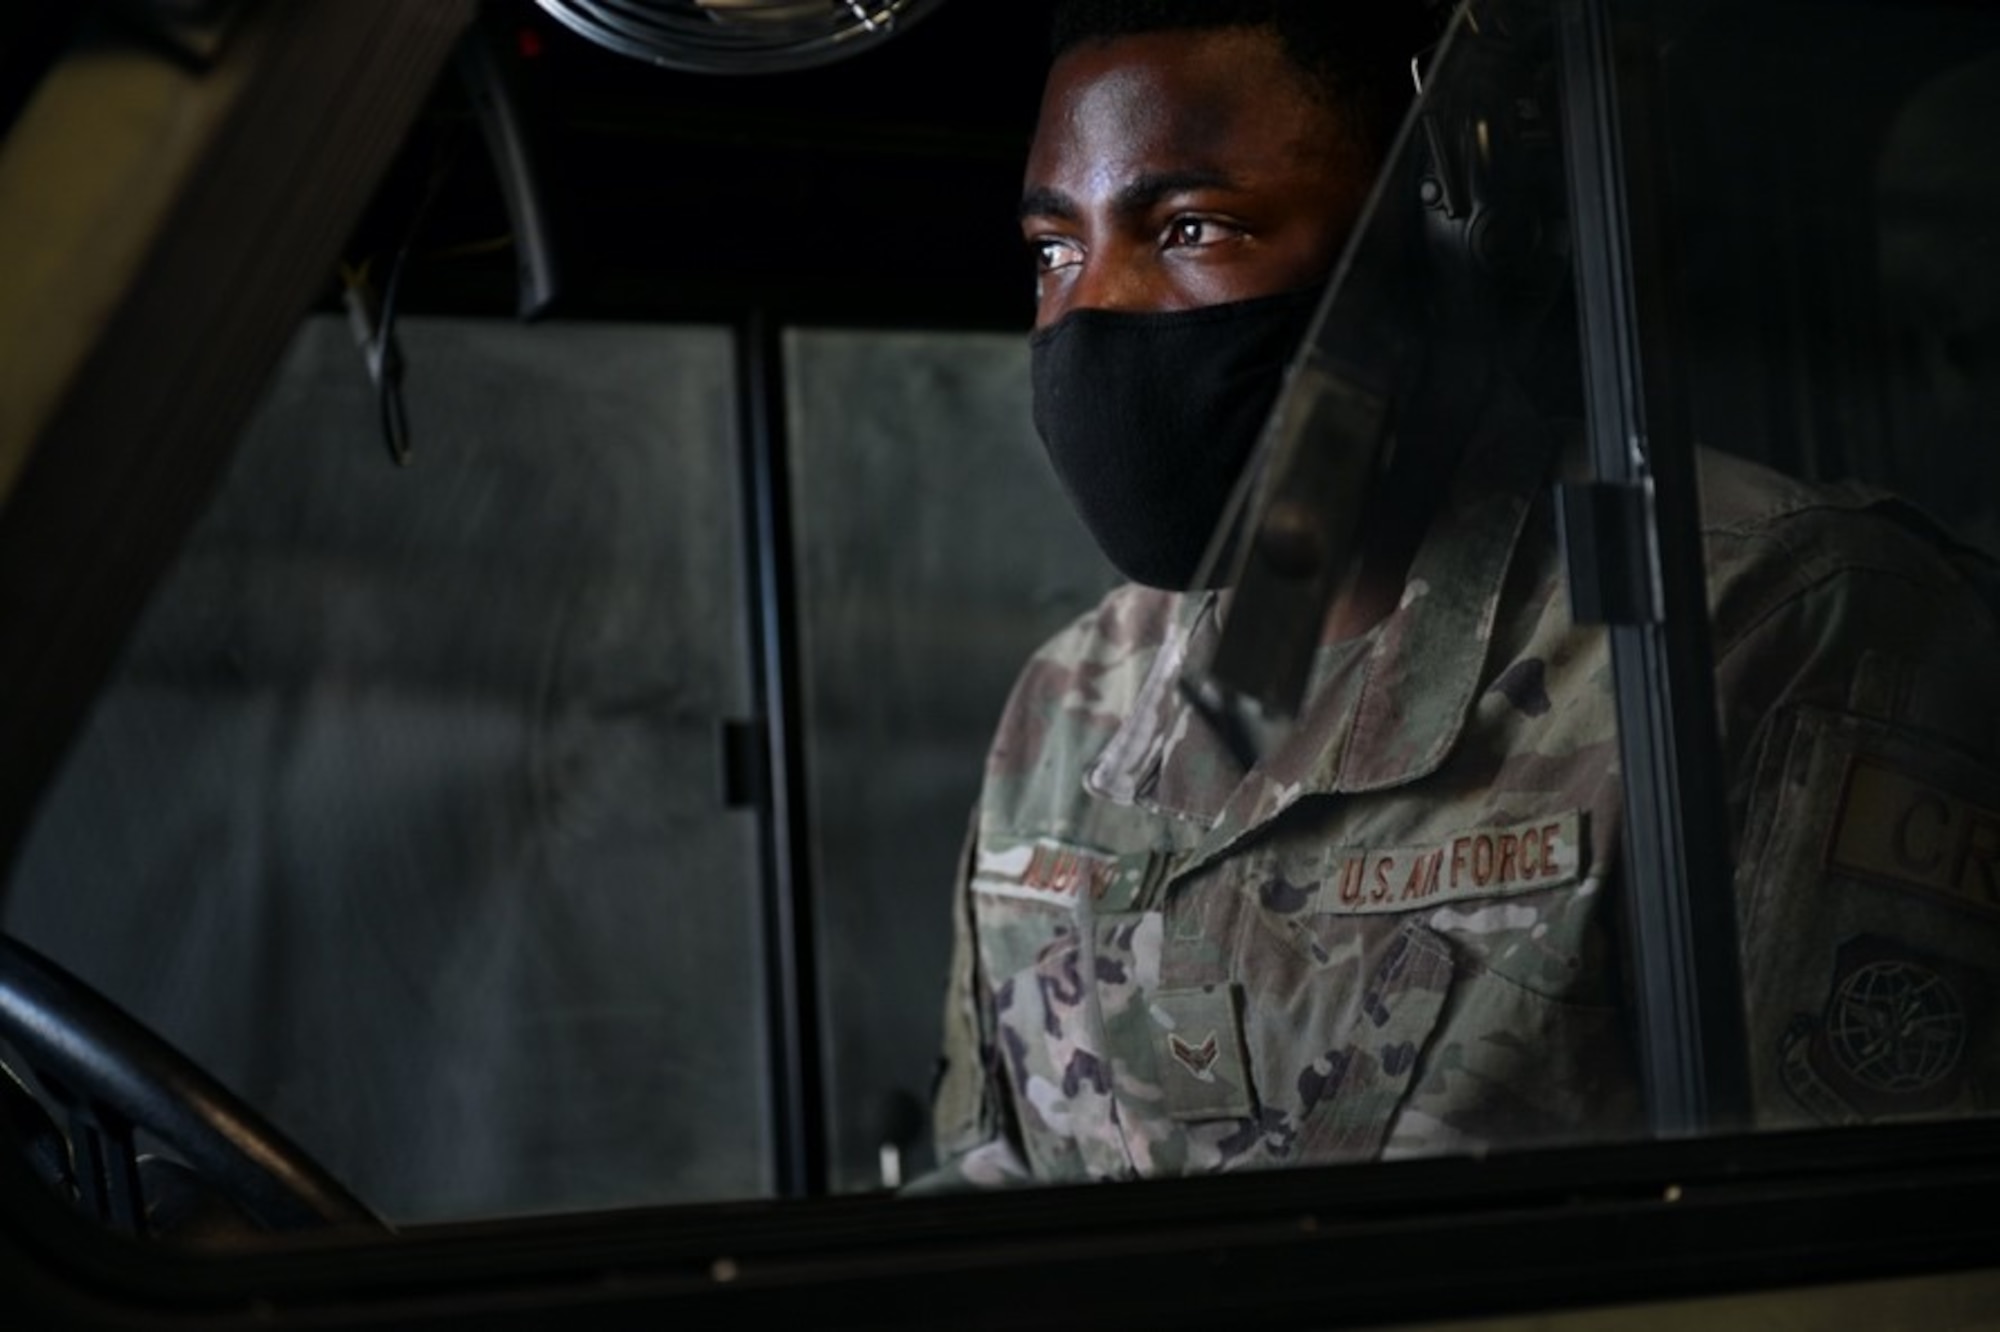 A military member in uniform and mask looks off screen